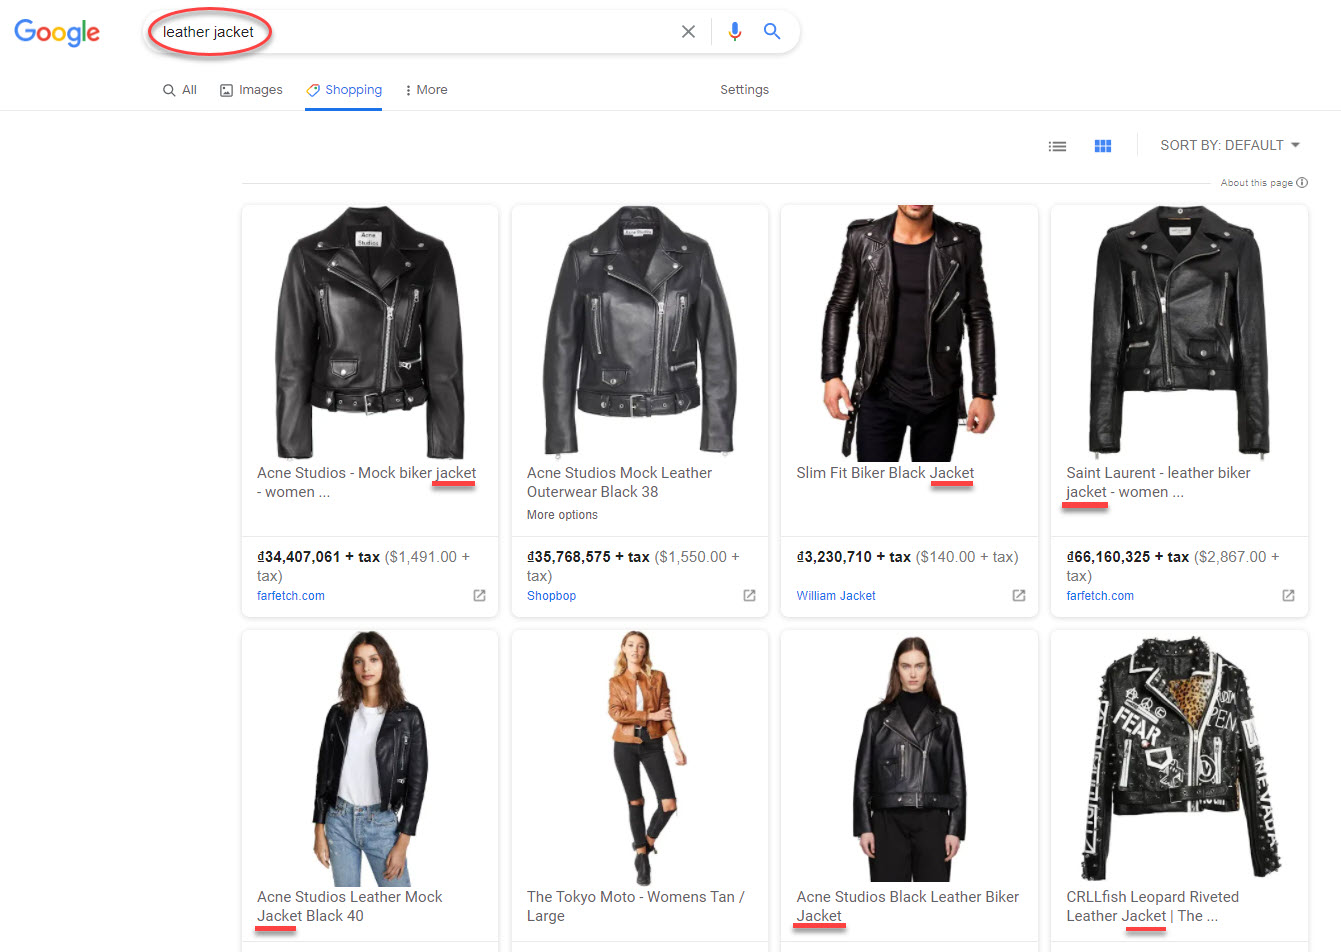 Your Google Shopping ads will be affected by the inaccurate product categories